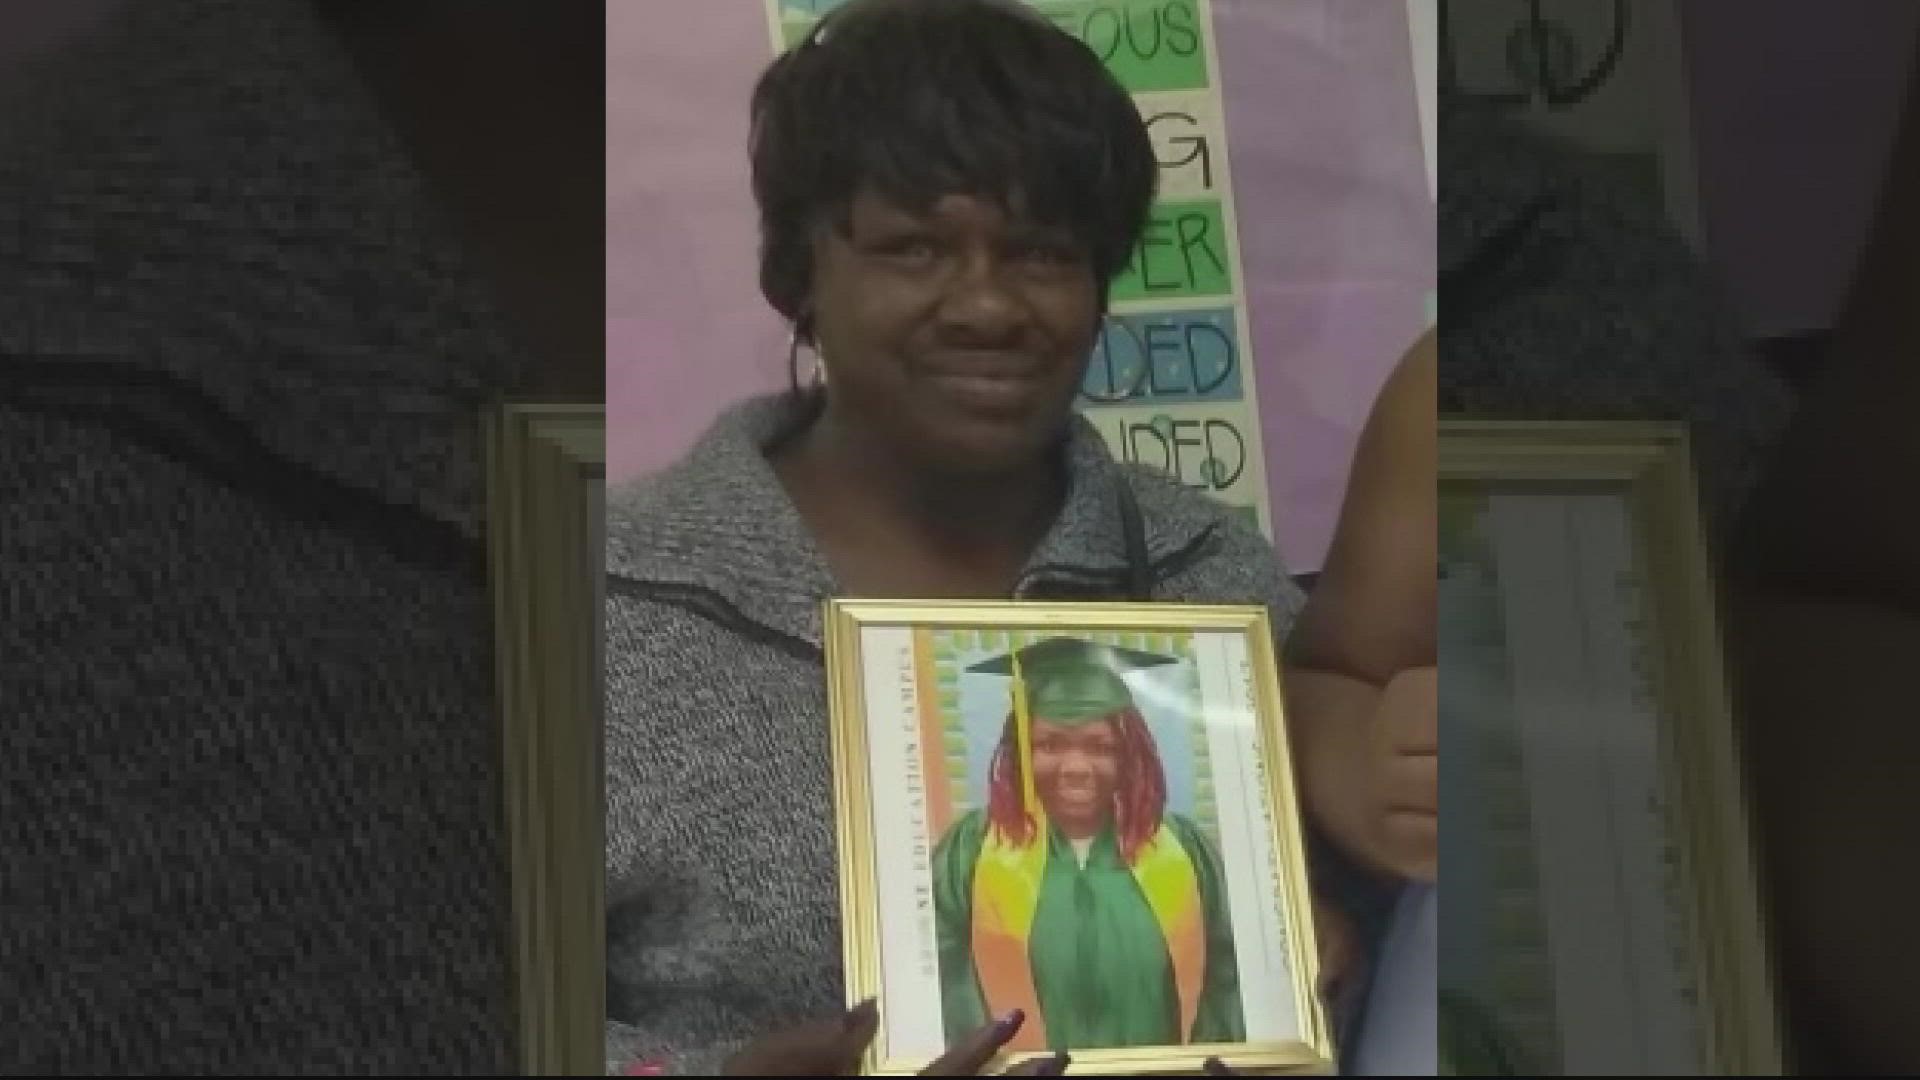 The children of a D.C. woman want justice after their mother was struck and killed by a driver who fled the scene in Oxon Hill, Maryland.